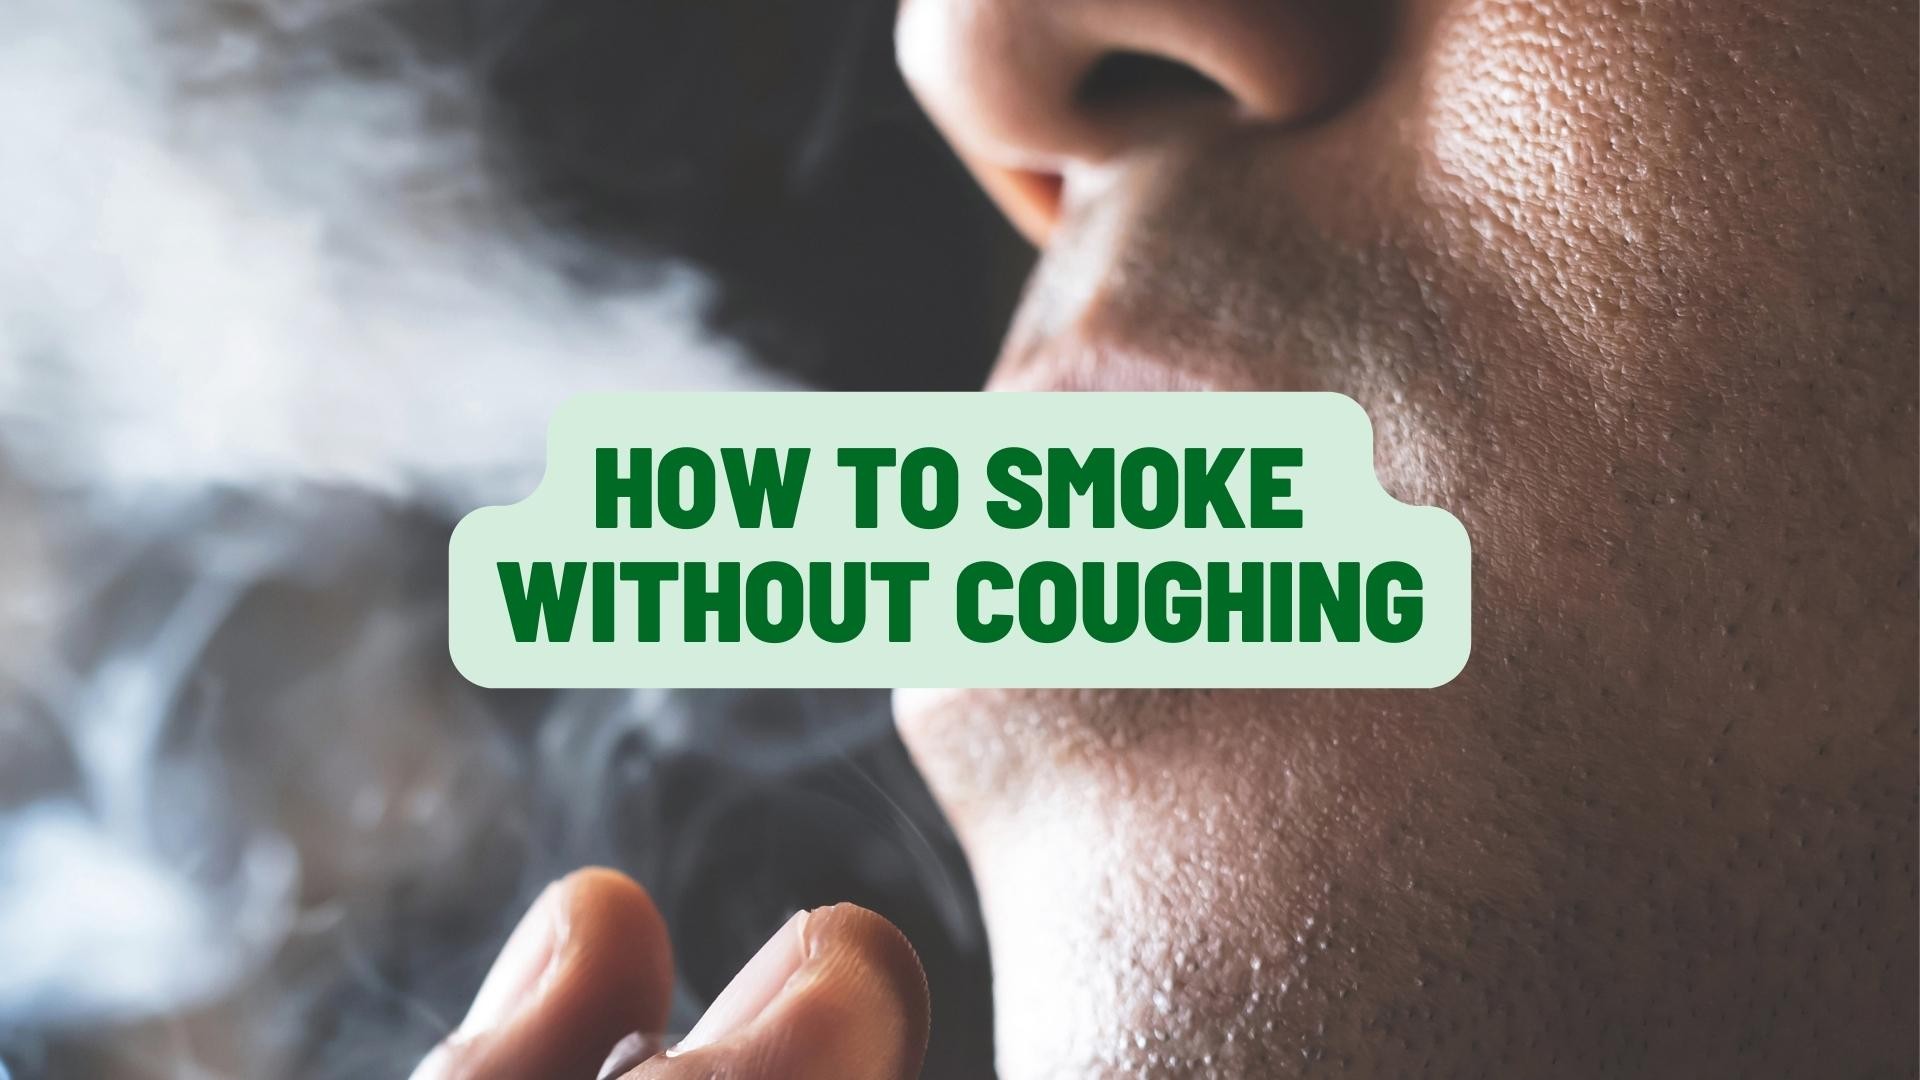 How to Smoke Without Coughing